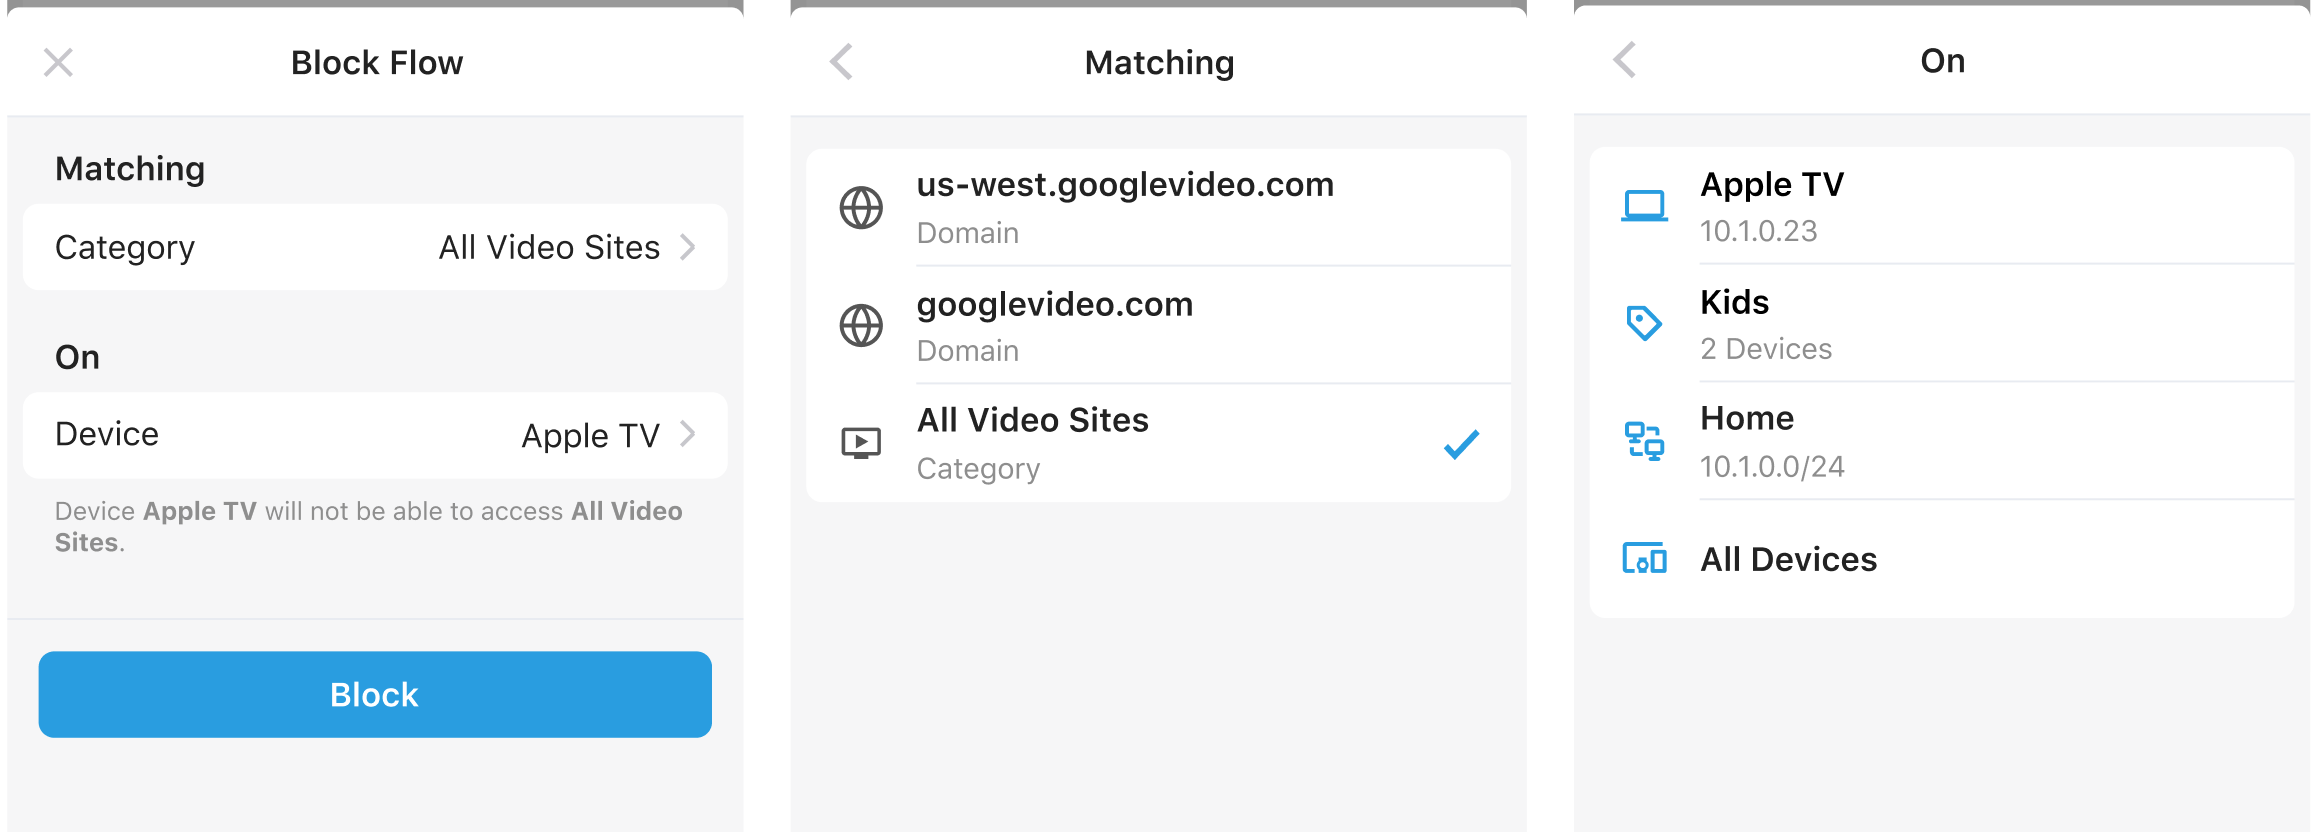 Example blocked flow from accessing video sites